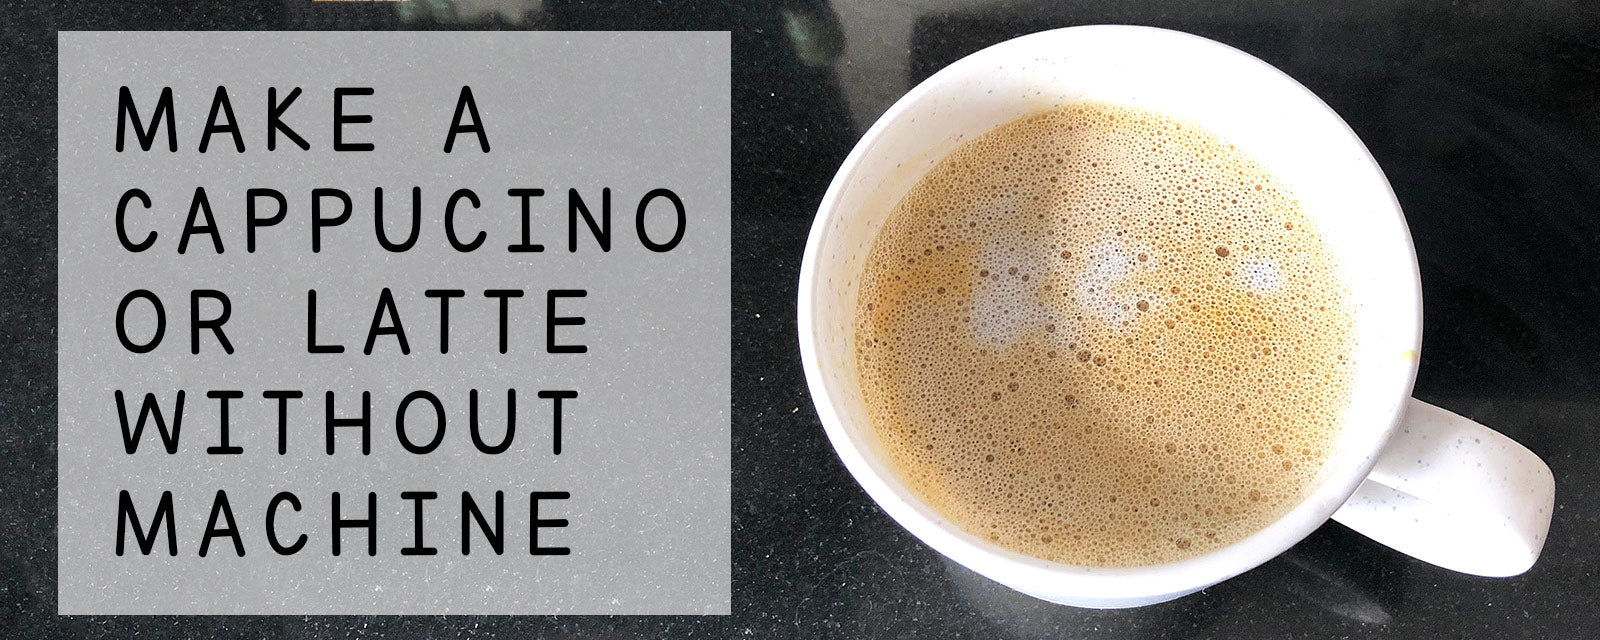 How to make a cappuccino of latte without a machine